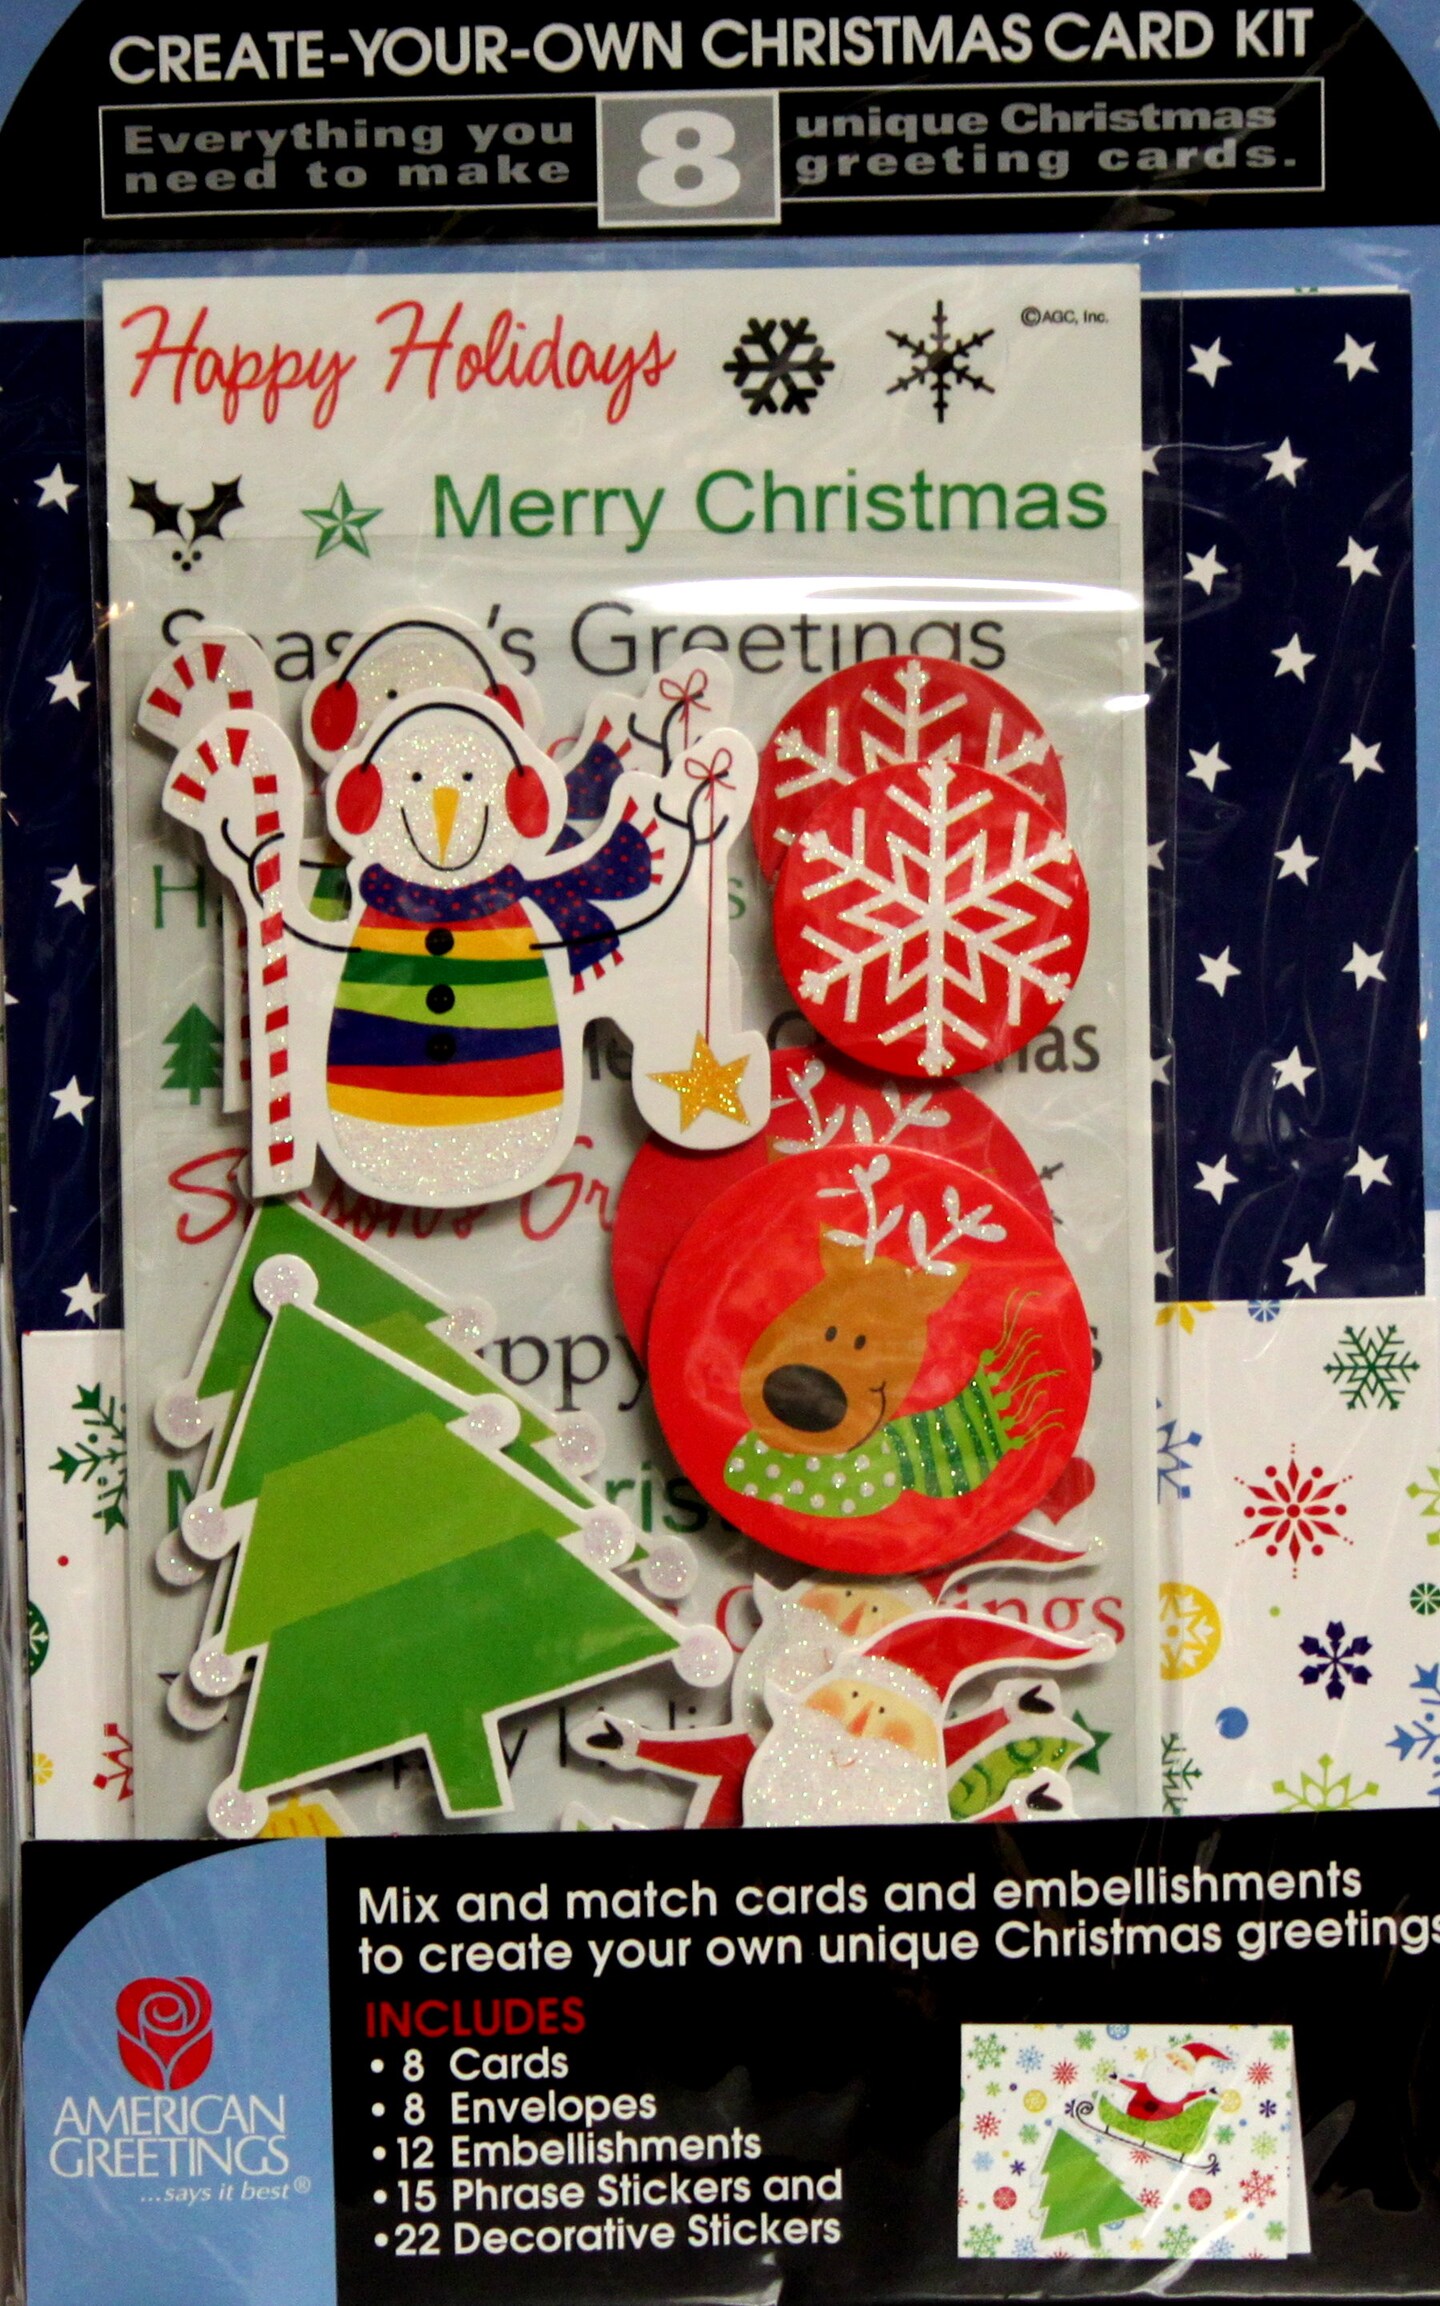 American Greetings Create-Your-Own Christmas Card Kit